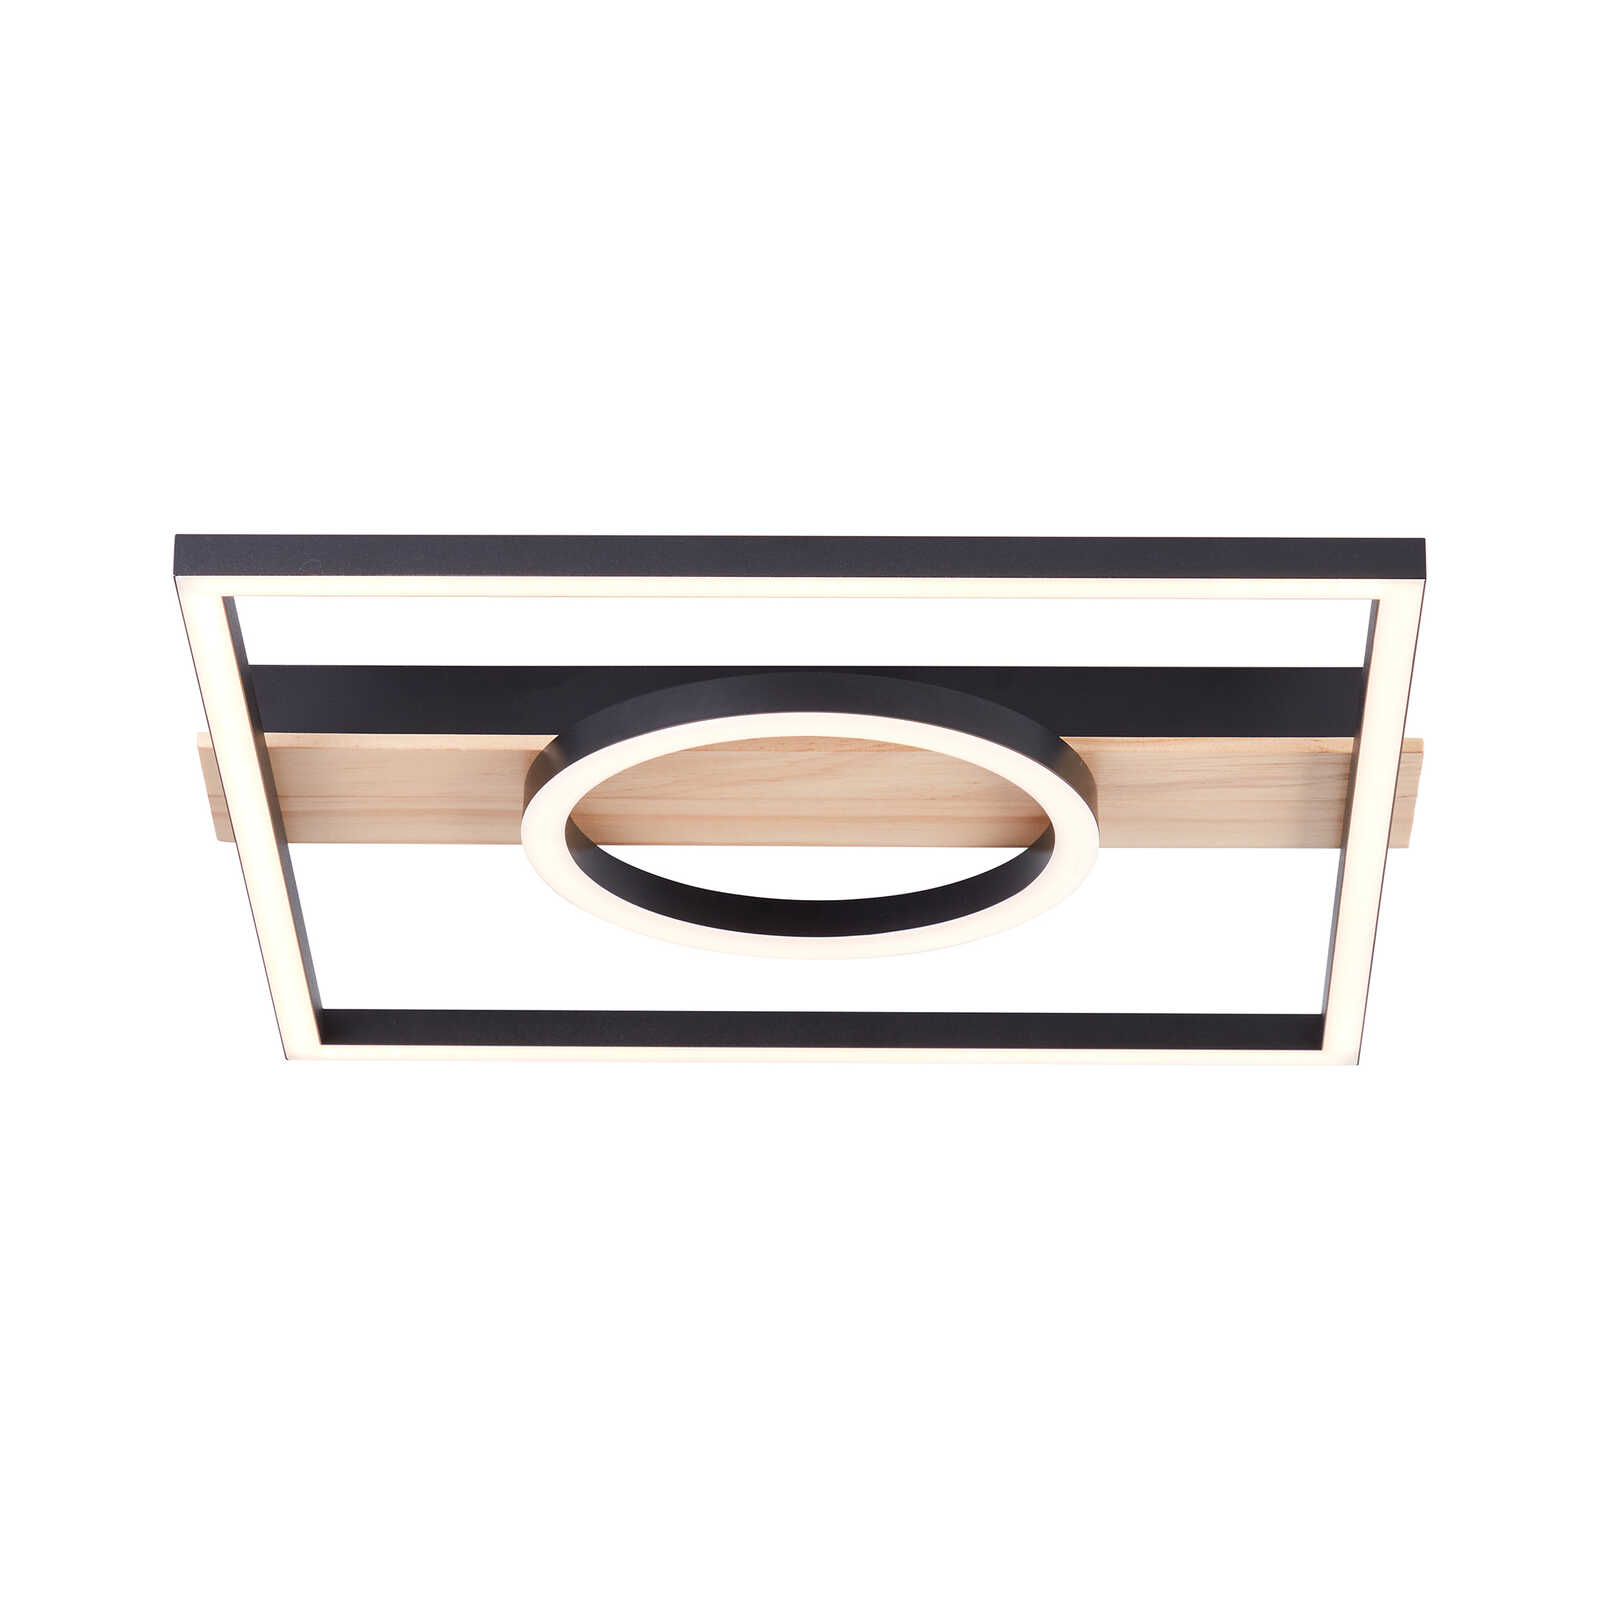 Wooden ceiling light - Leopold 4 - Brown
